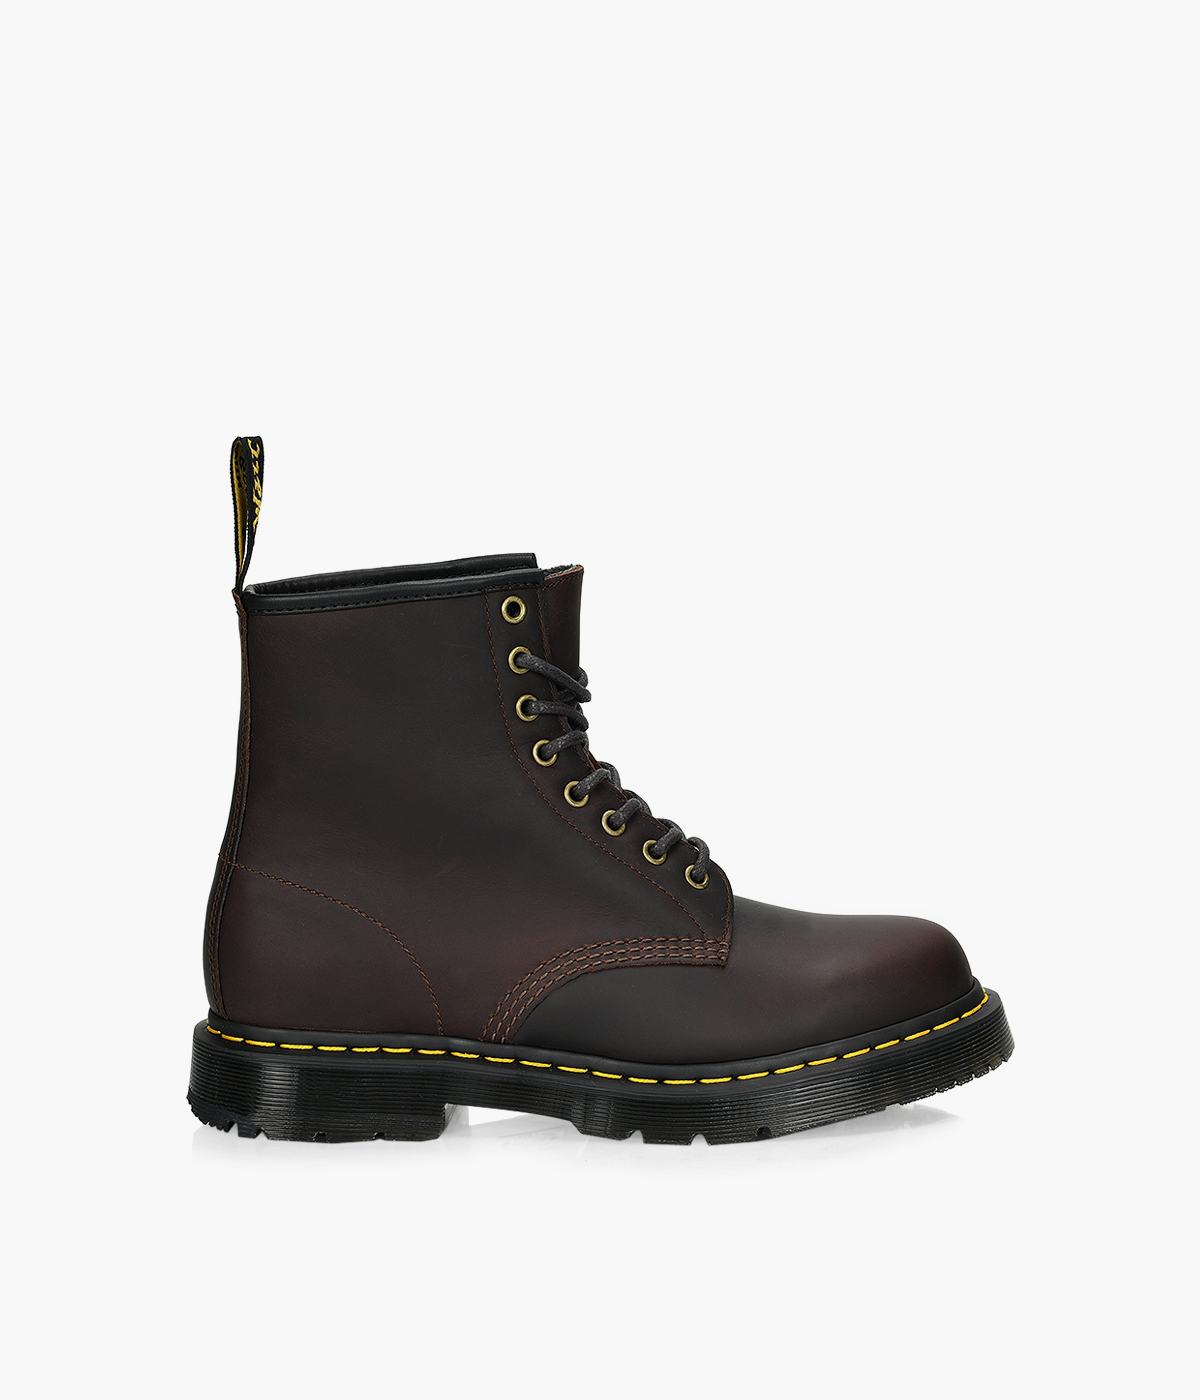 DR. MARTENS 1460 WINTERGRIP - Leather | Browns Shoes